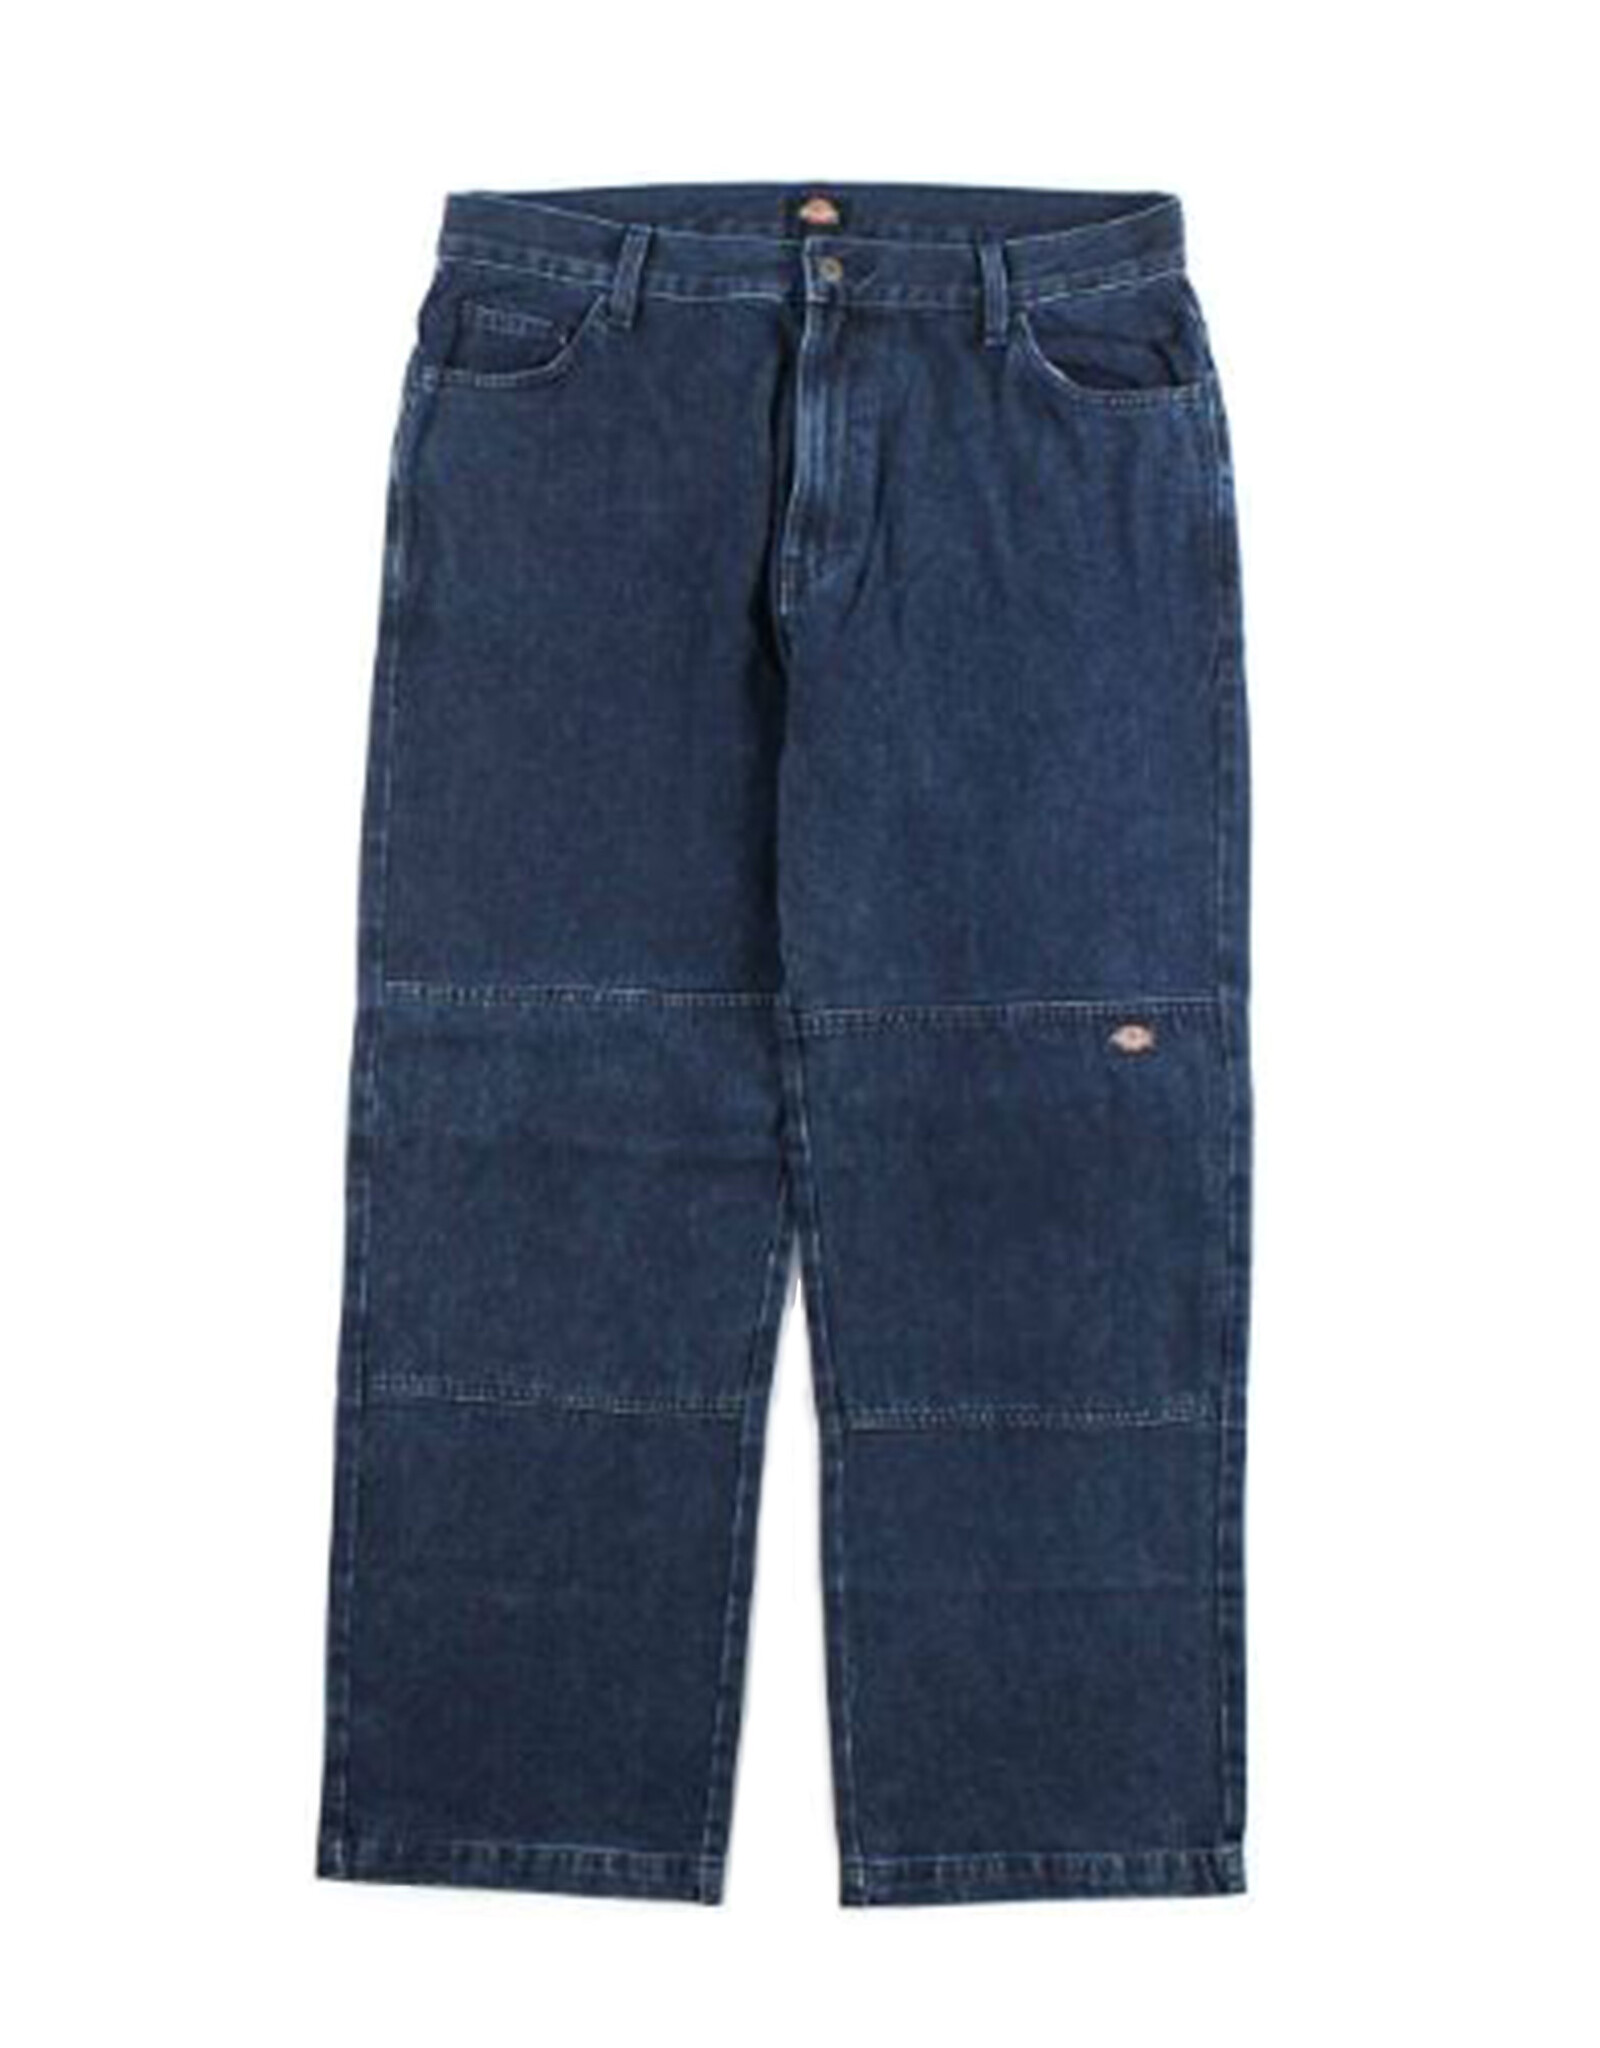 DICKIES Loose Fit Double Knee Jeans Stonewashed Indigo Blue